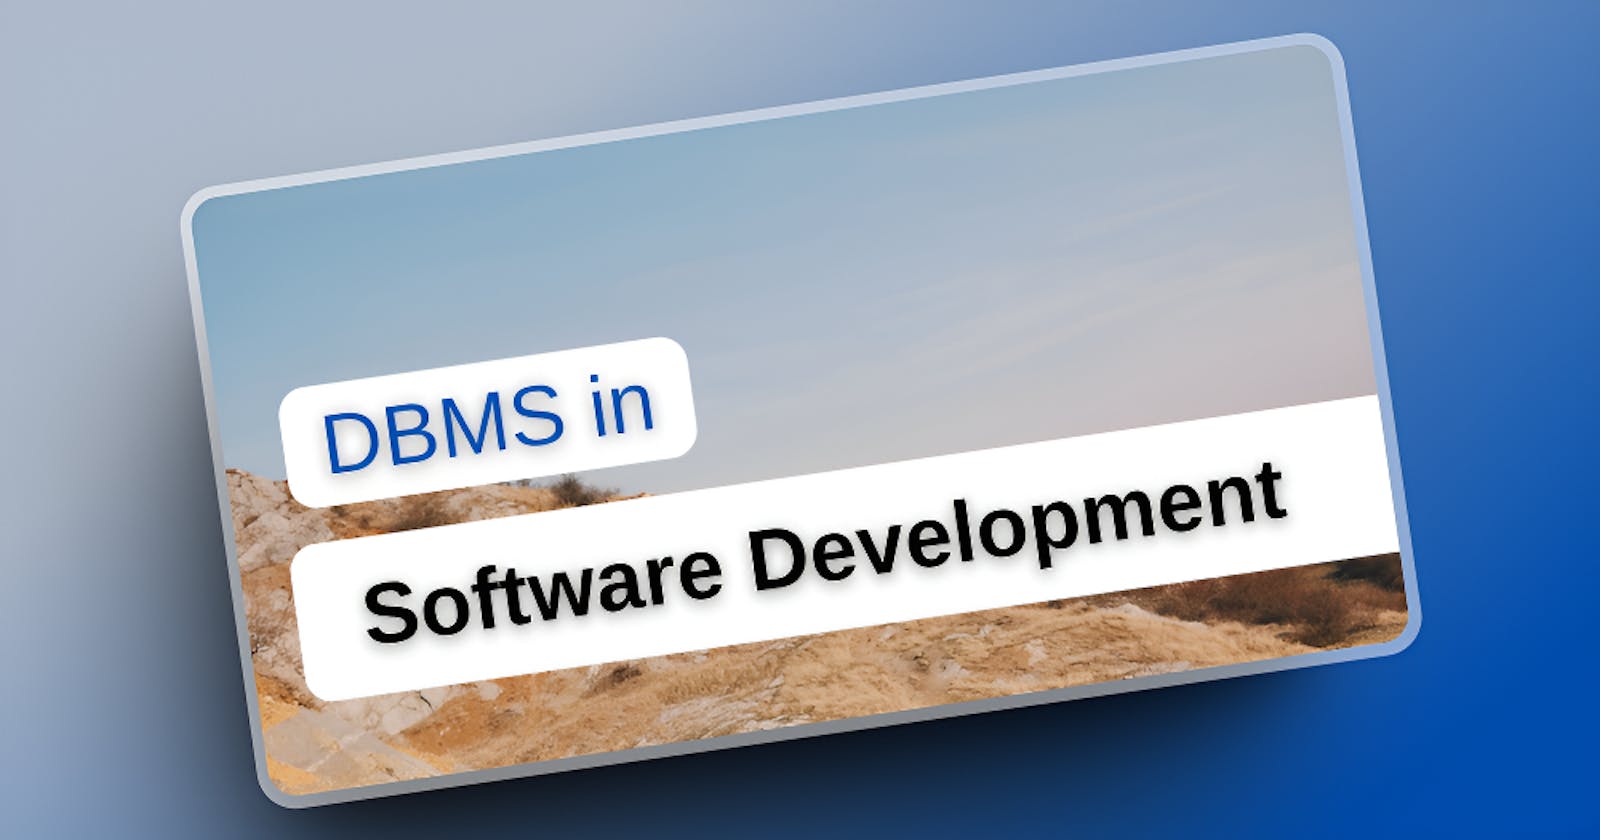 Database Management Systems and Their Role in Software Development